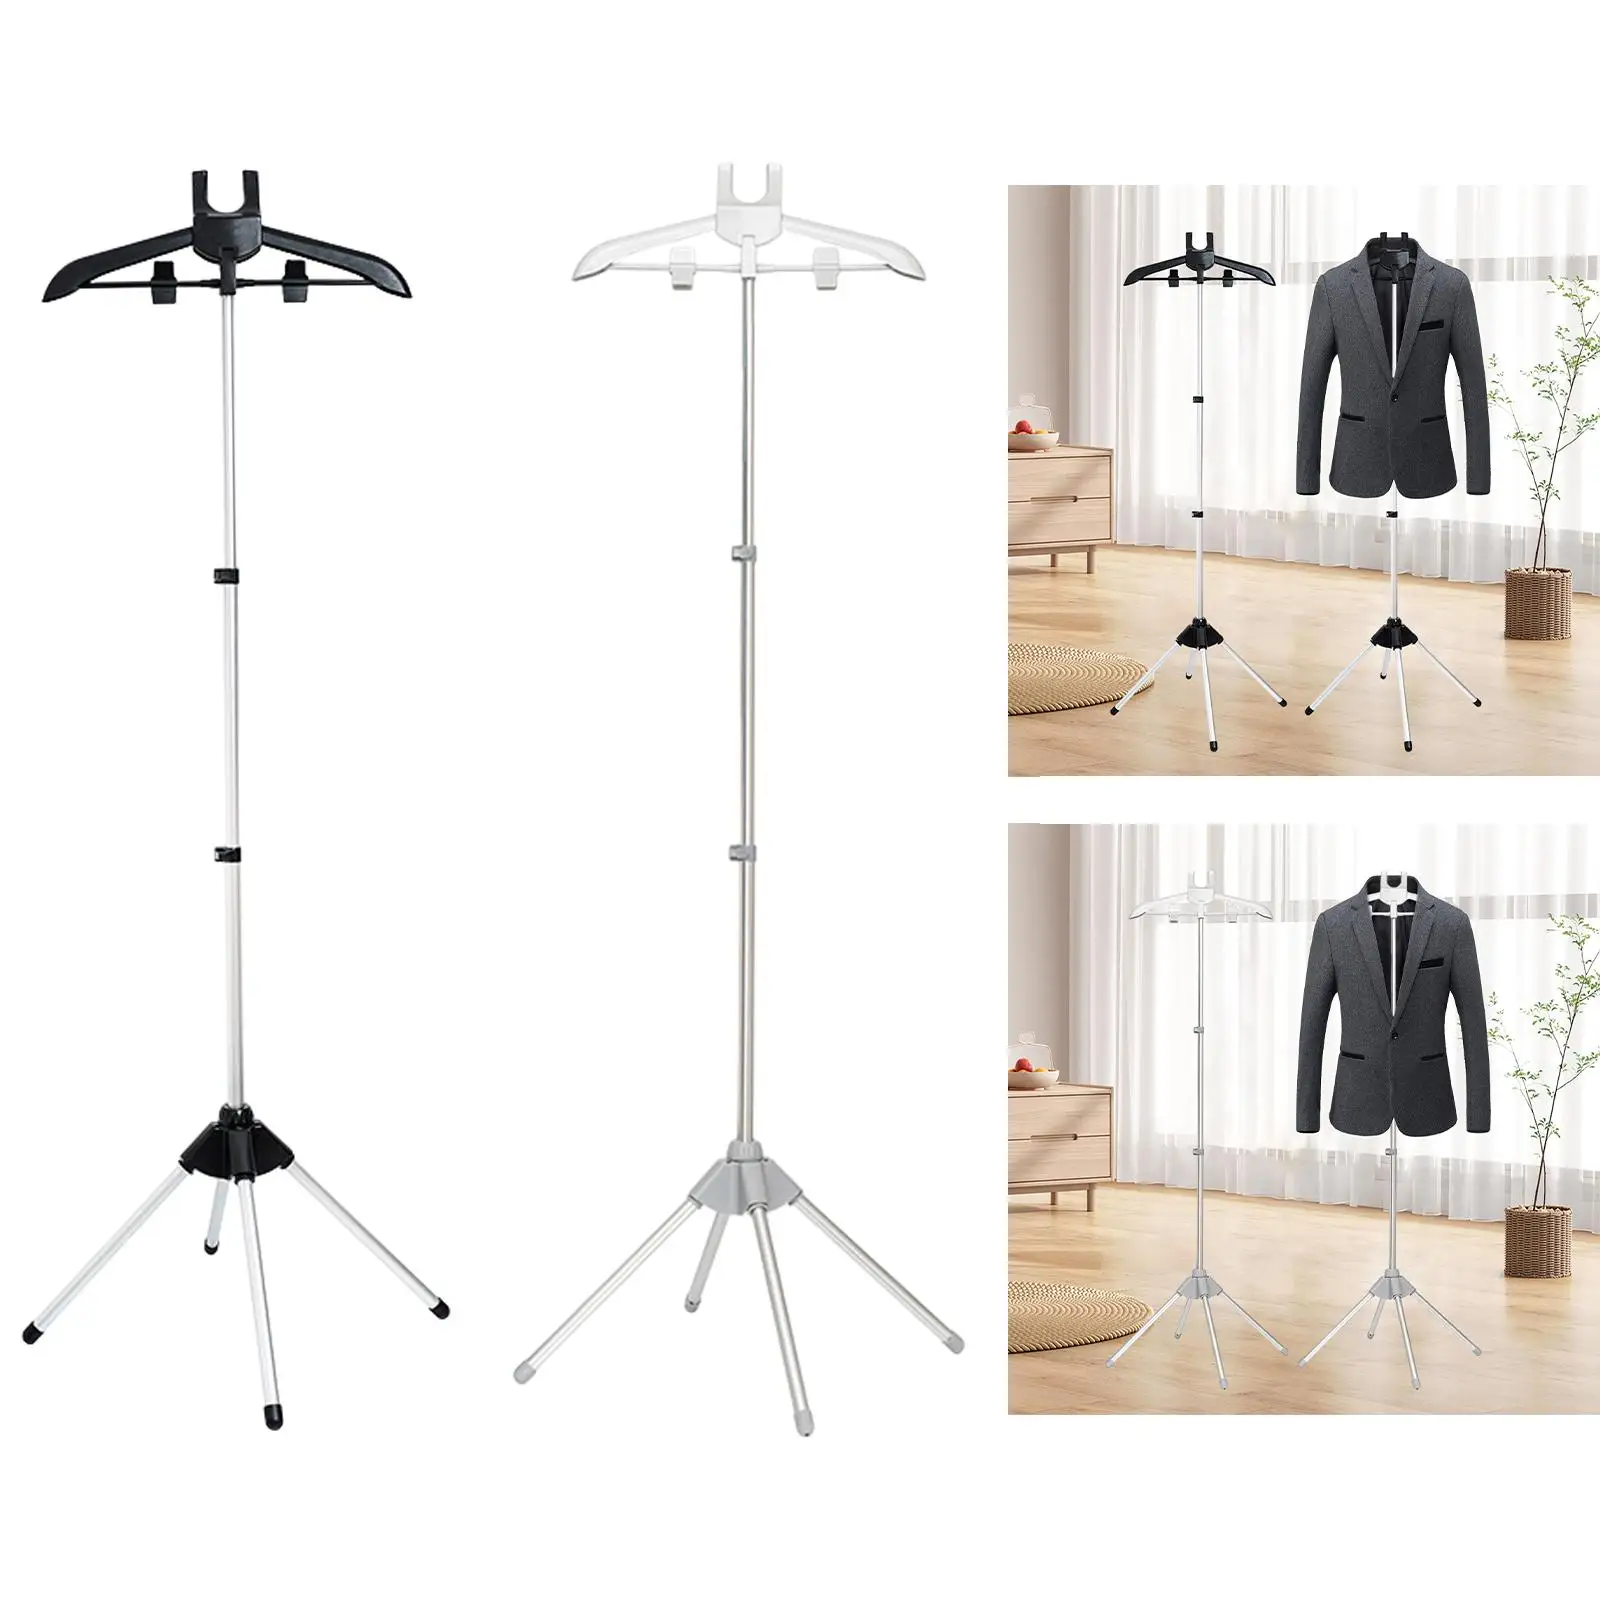 Handheld Ironing Machine Bracket Foldable Easy to Storage Metal Telescopic Adjustable Height Fittings Stand Holder for Coat